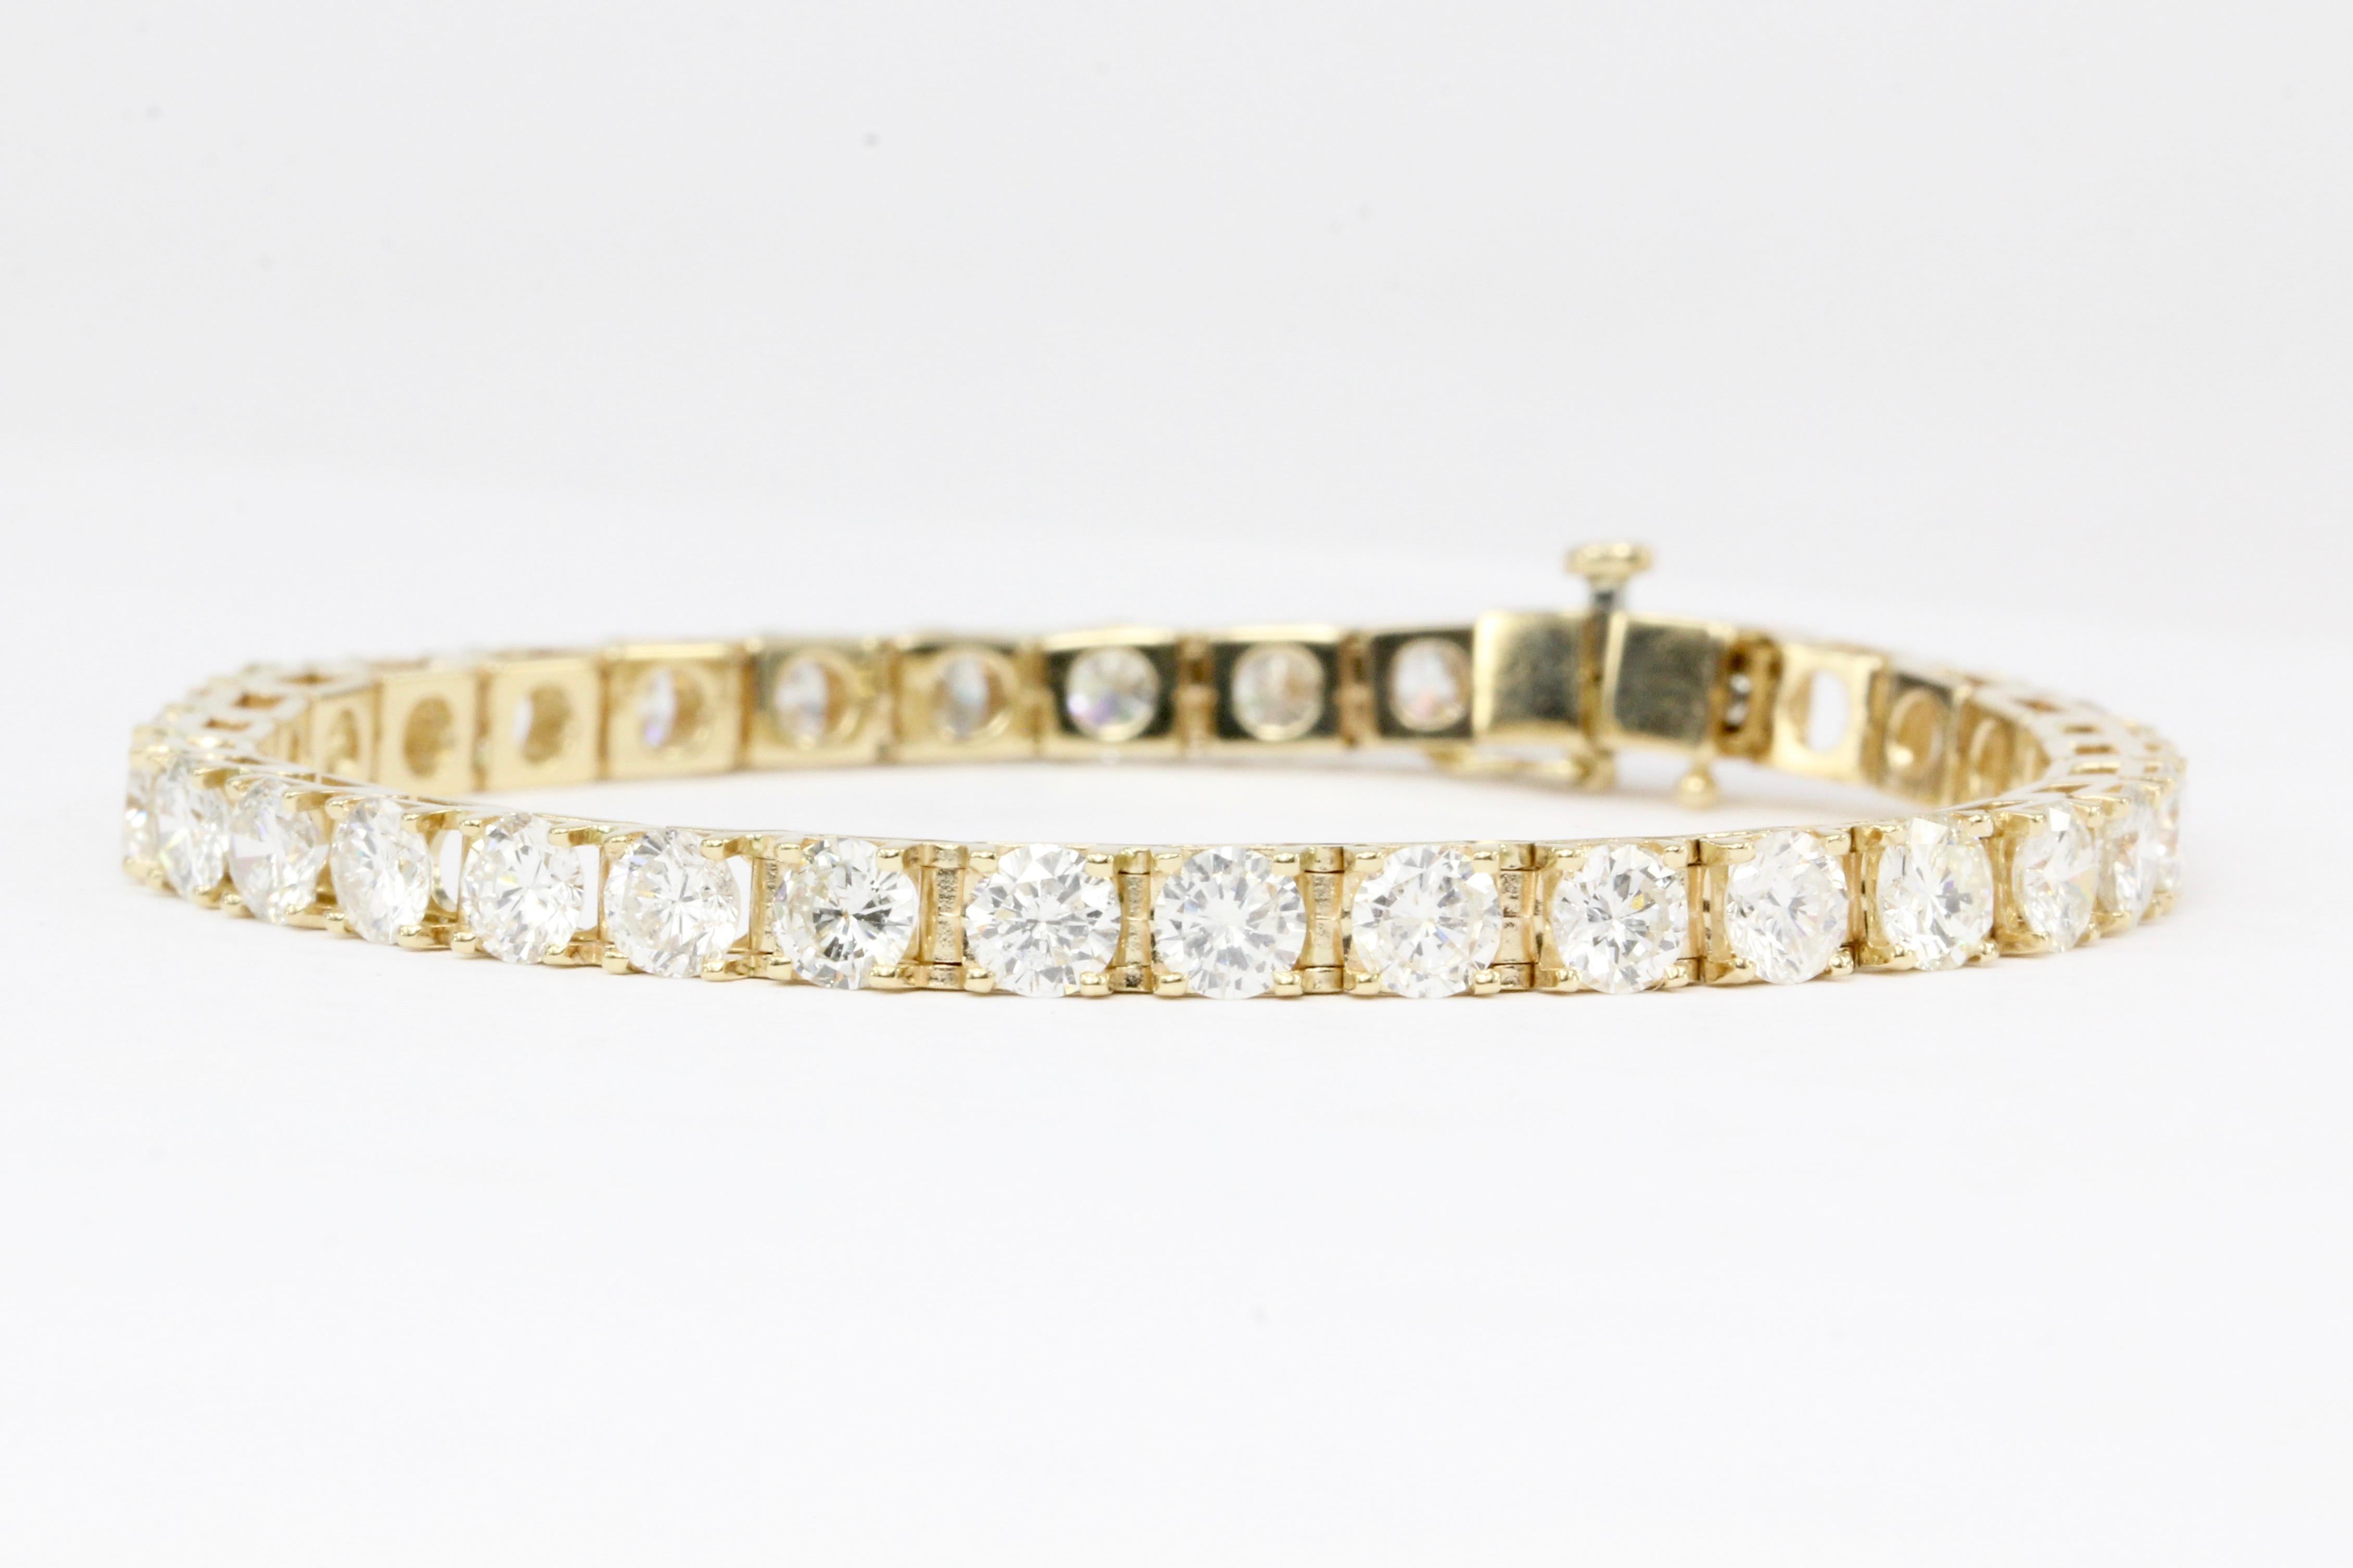 Hallmarks: 14K

Composition: 14K Yellow Gold

Primary Stone: Diamond 

Shape: Rounds 

Color/Clarity: G/H - I1

Total Diamond Weight: Approximately 7 carats

Bracelet length: 6.25 inches

Bracelet width: 3.95mm

Bracelet Weight: 11.4 grams